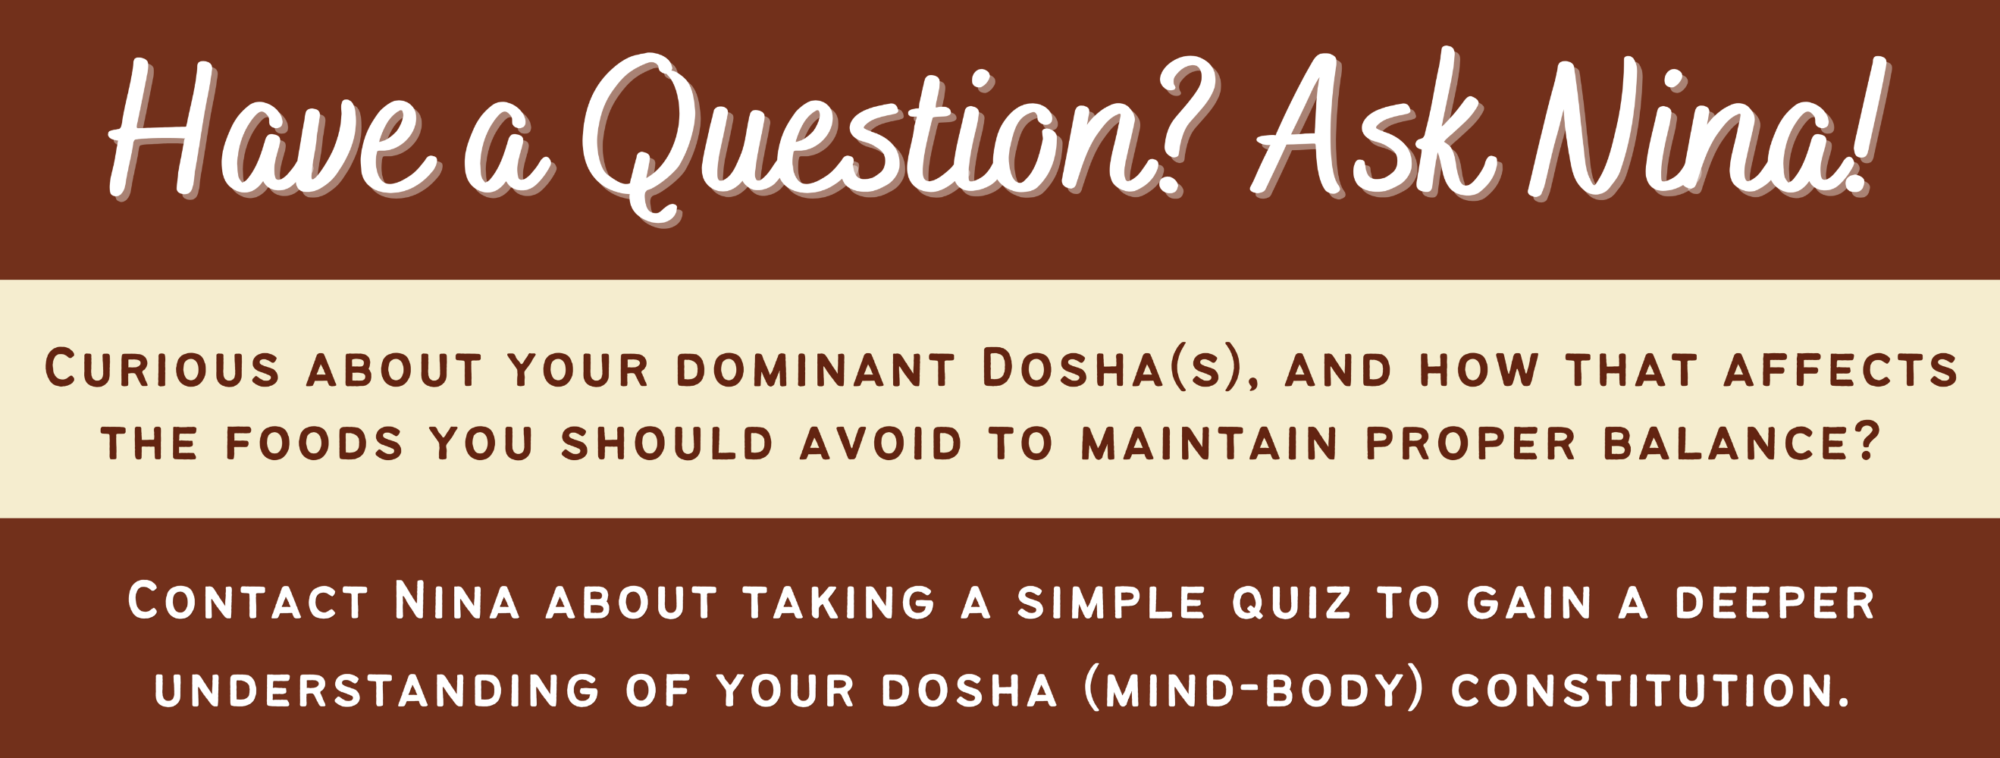 Contact Nina Shah about taking a simple quiz to gain a deeper understanding of your dosha